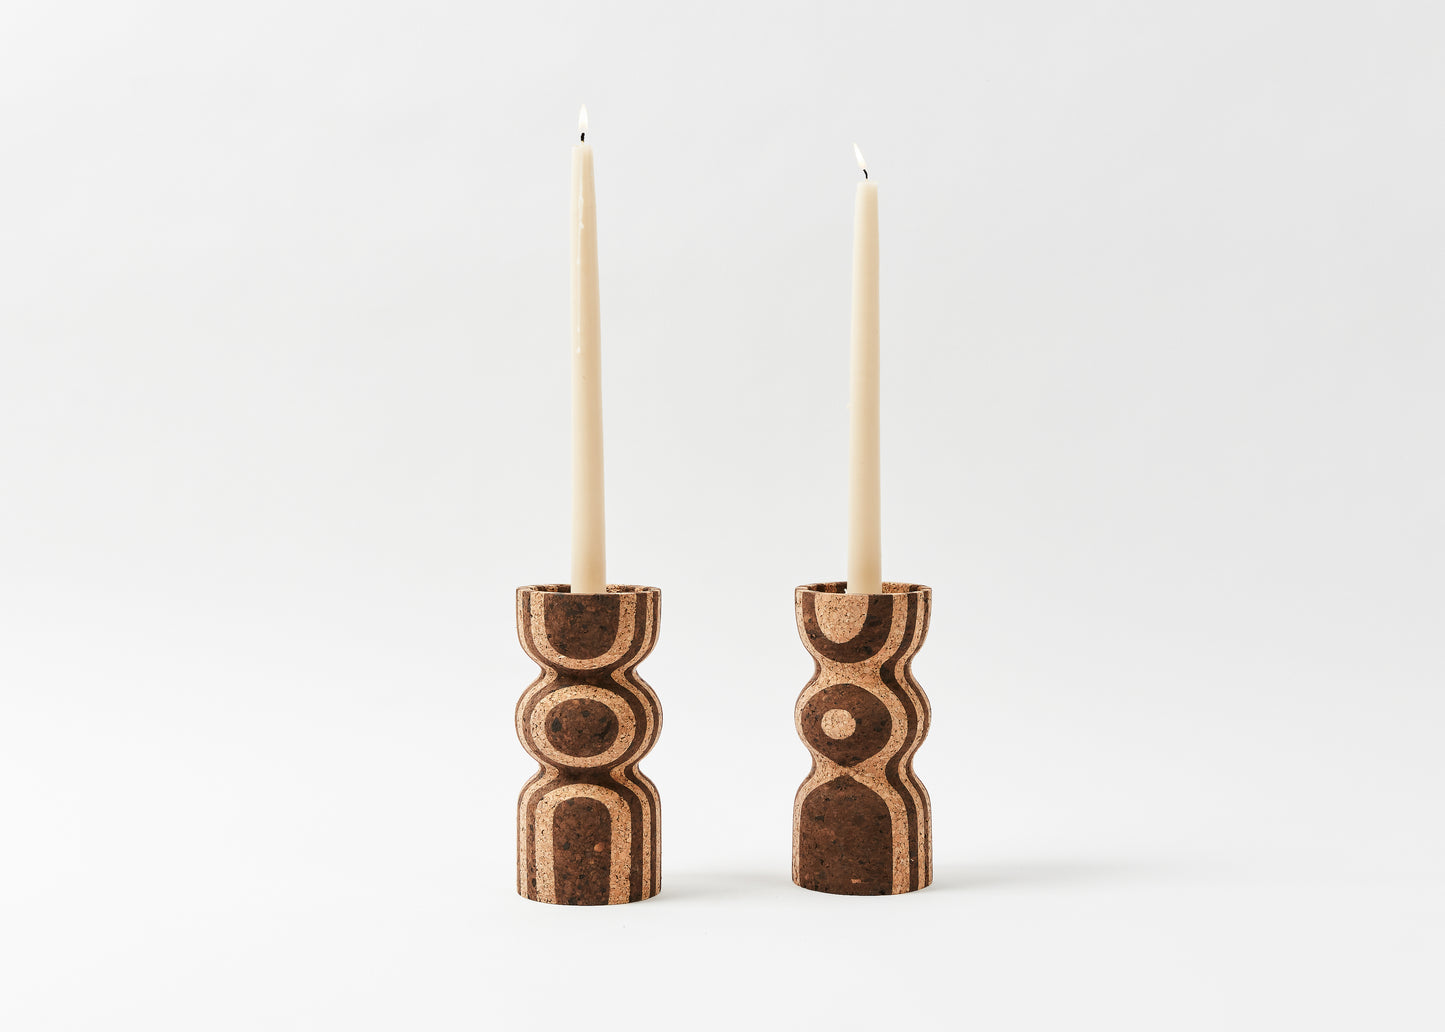 Anni Tall Striped Cork Candle Holder. The dark and light striped cork combined with the curved shape adds interest to any space.